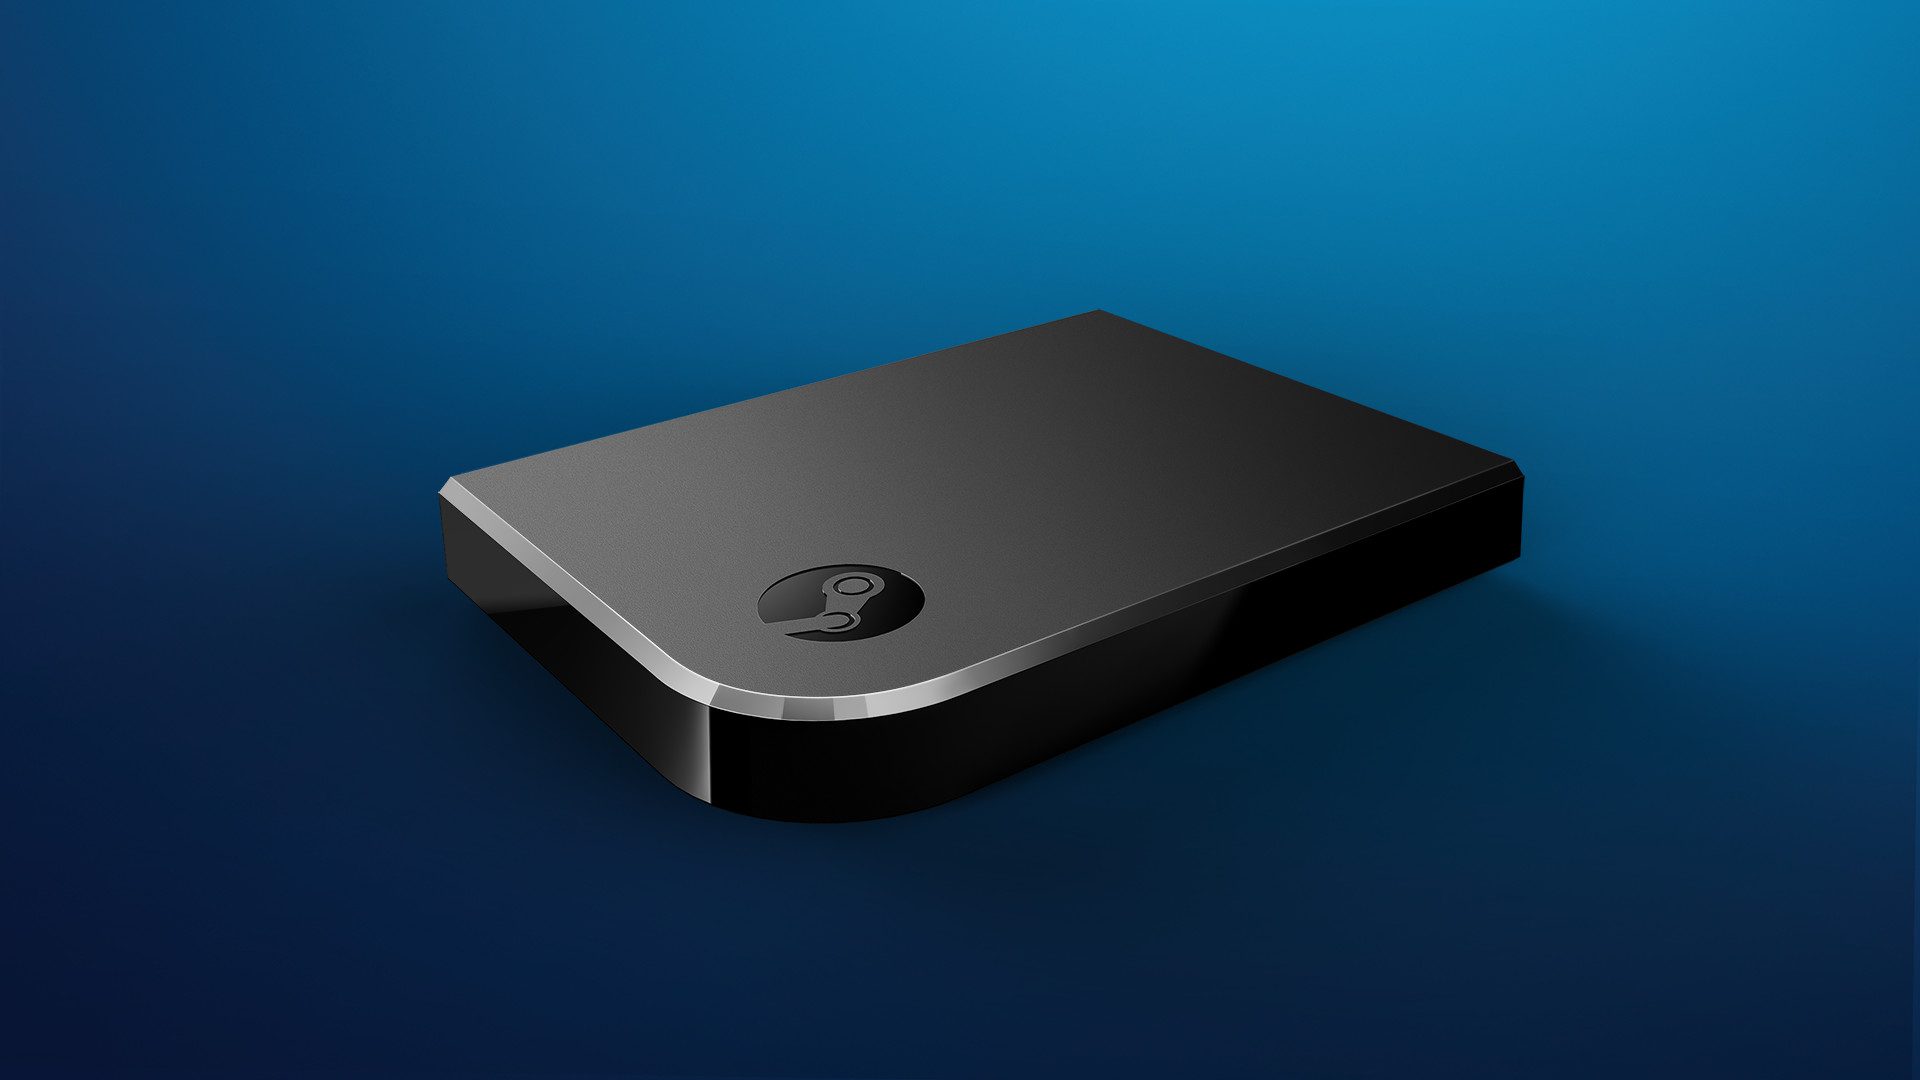 Steam Link Bundle: Get A Steam Link And A Game For A Great Price